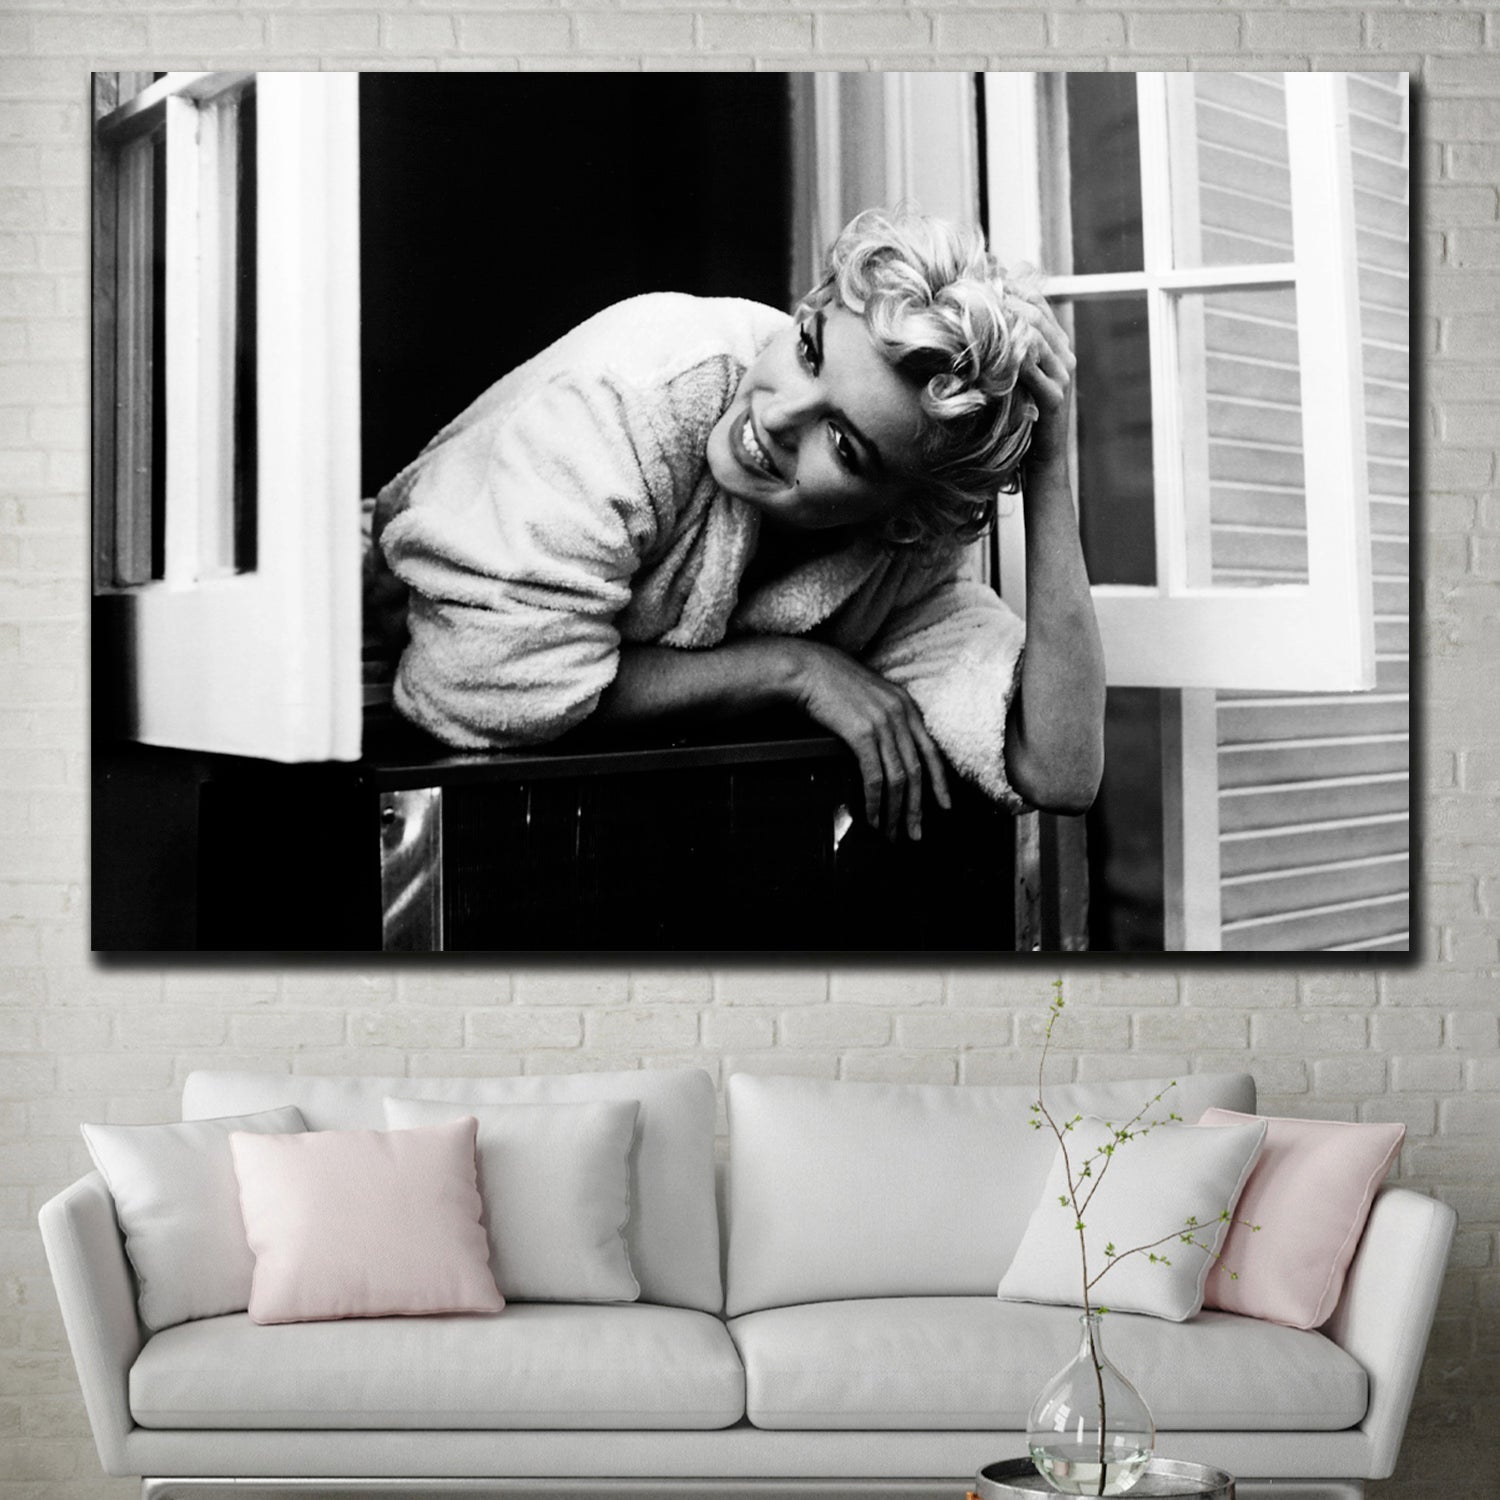 https://cdn.shopify.com/s/files/1/0387/9986/8044/products/MarilynMagicCanvasArtprintStretched-4.jpg